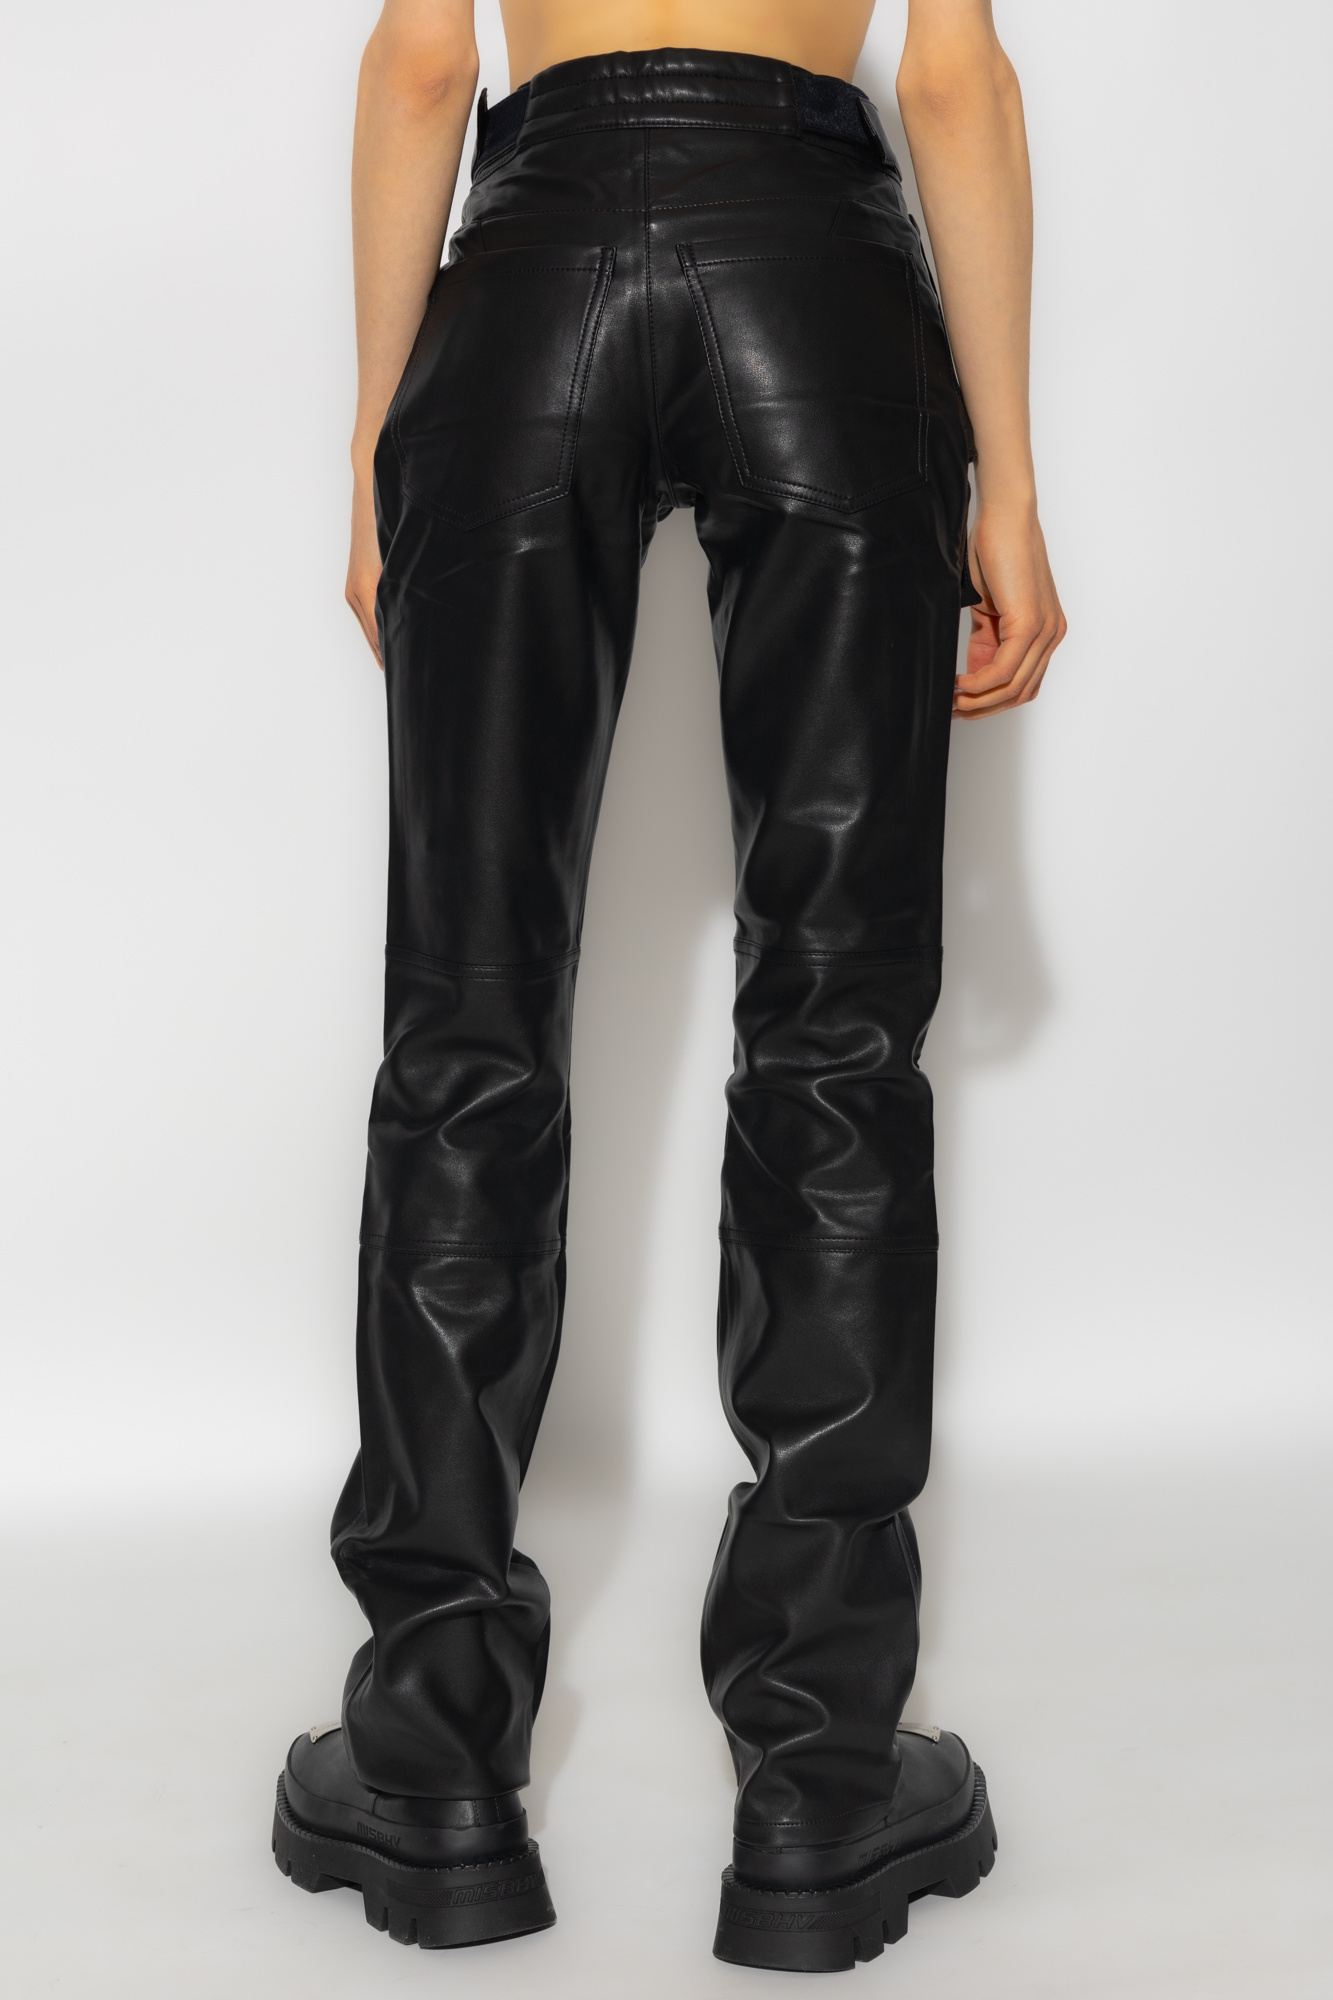 MISBHV ‘Moto’ Top trousers from vegan leather